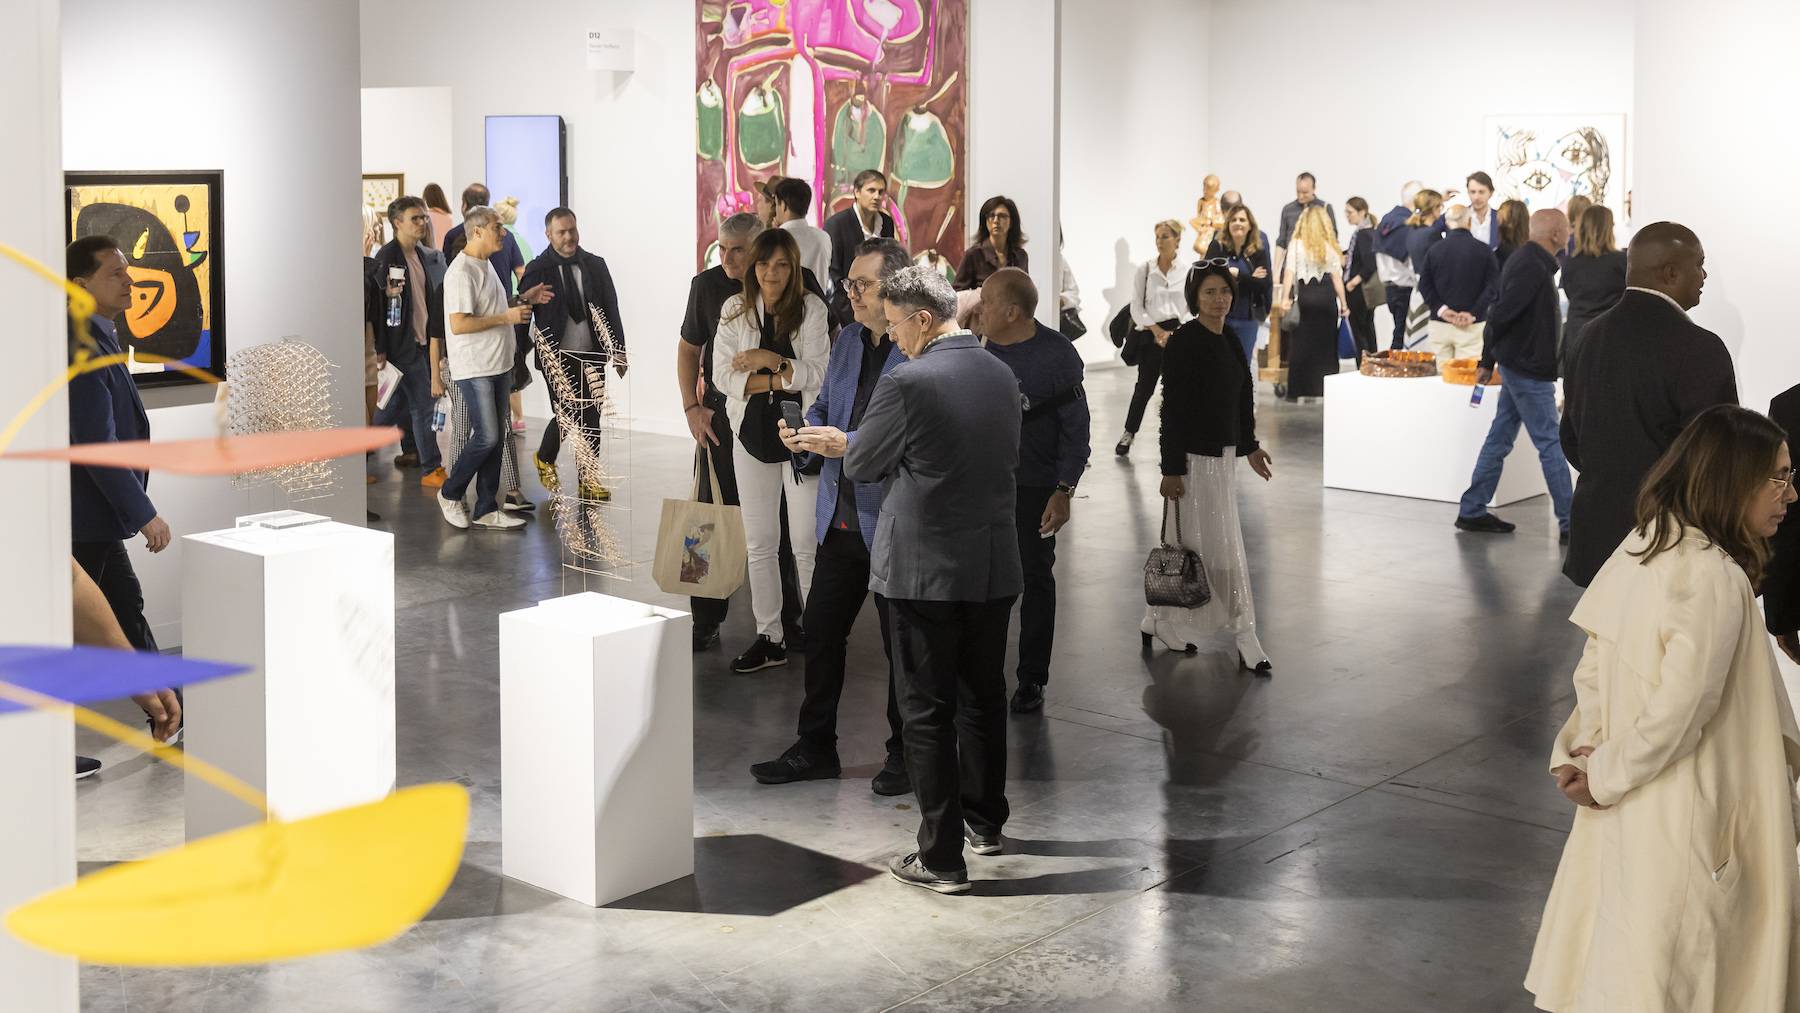 Art Basel Miami Beach attracts a high-spending crowd fashion is eager to reach.